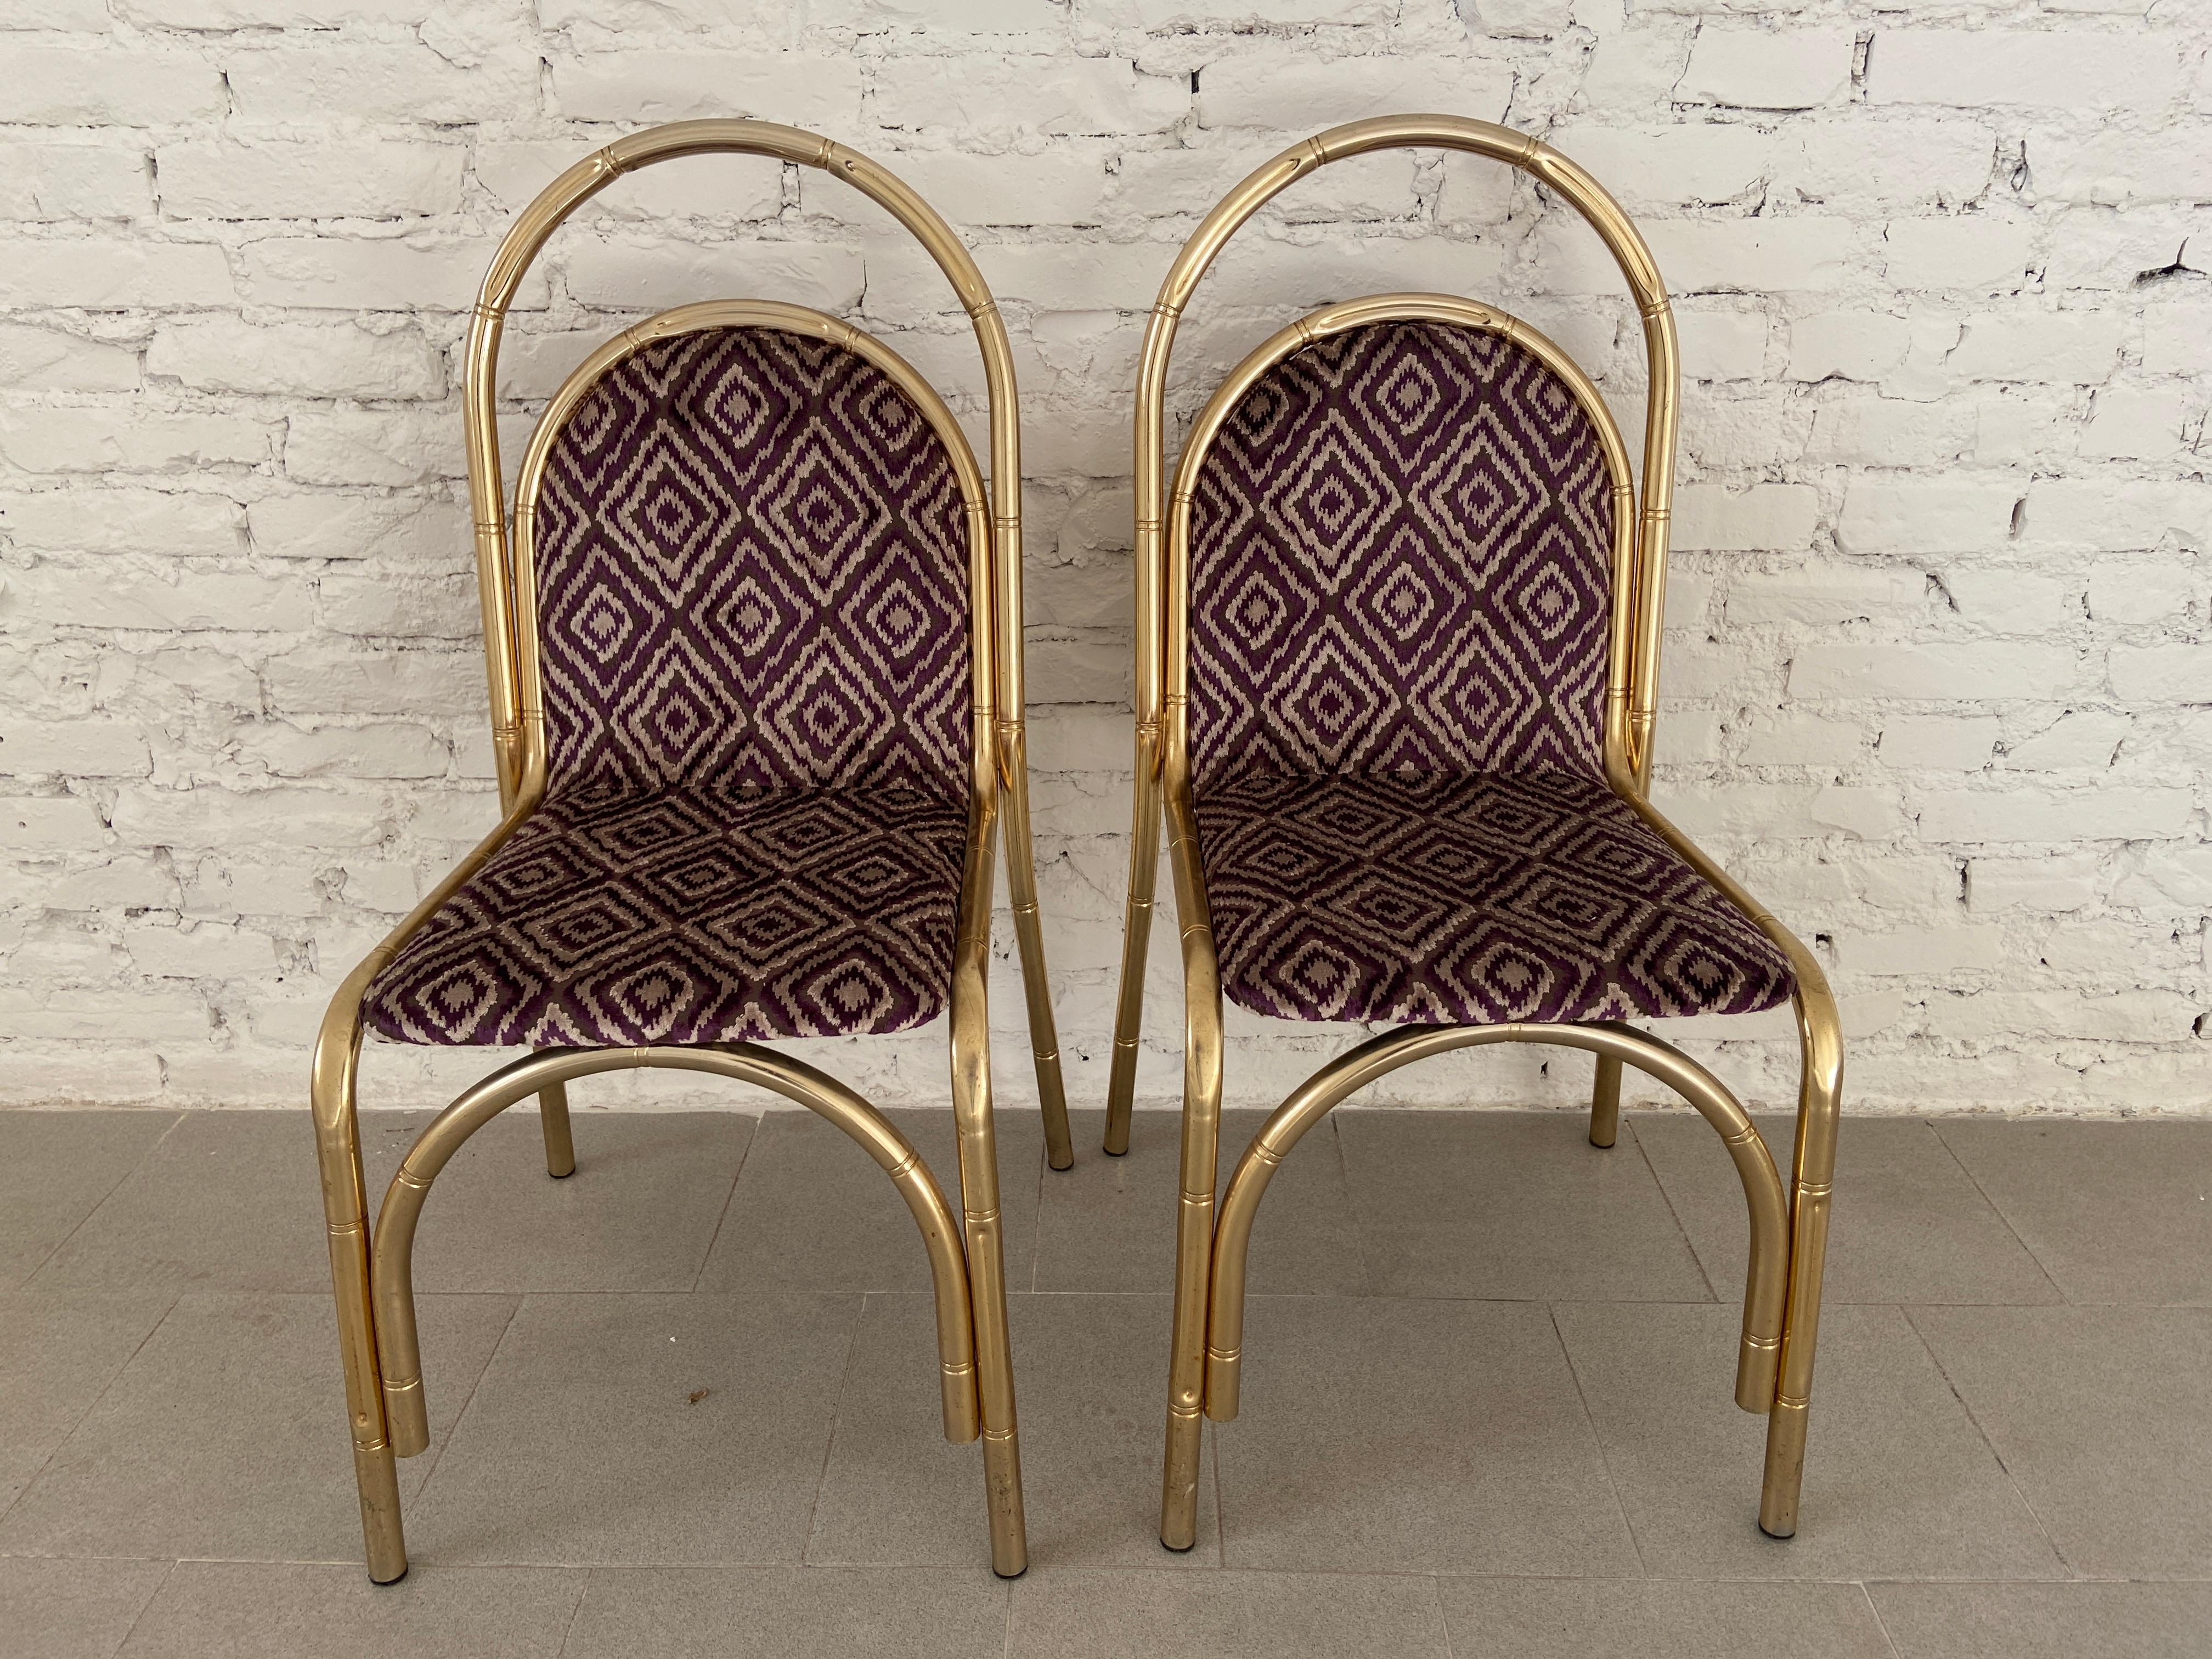 Mid-Century Modern Italian pair of faux bamboo gilt metal chairs reupholstered with original vintage velvet fabric from 1970s.